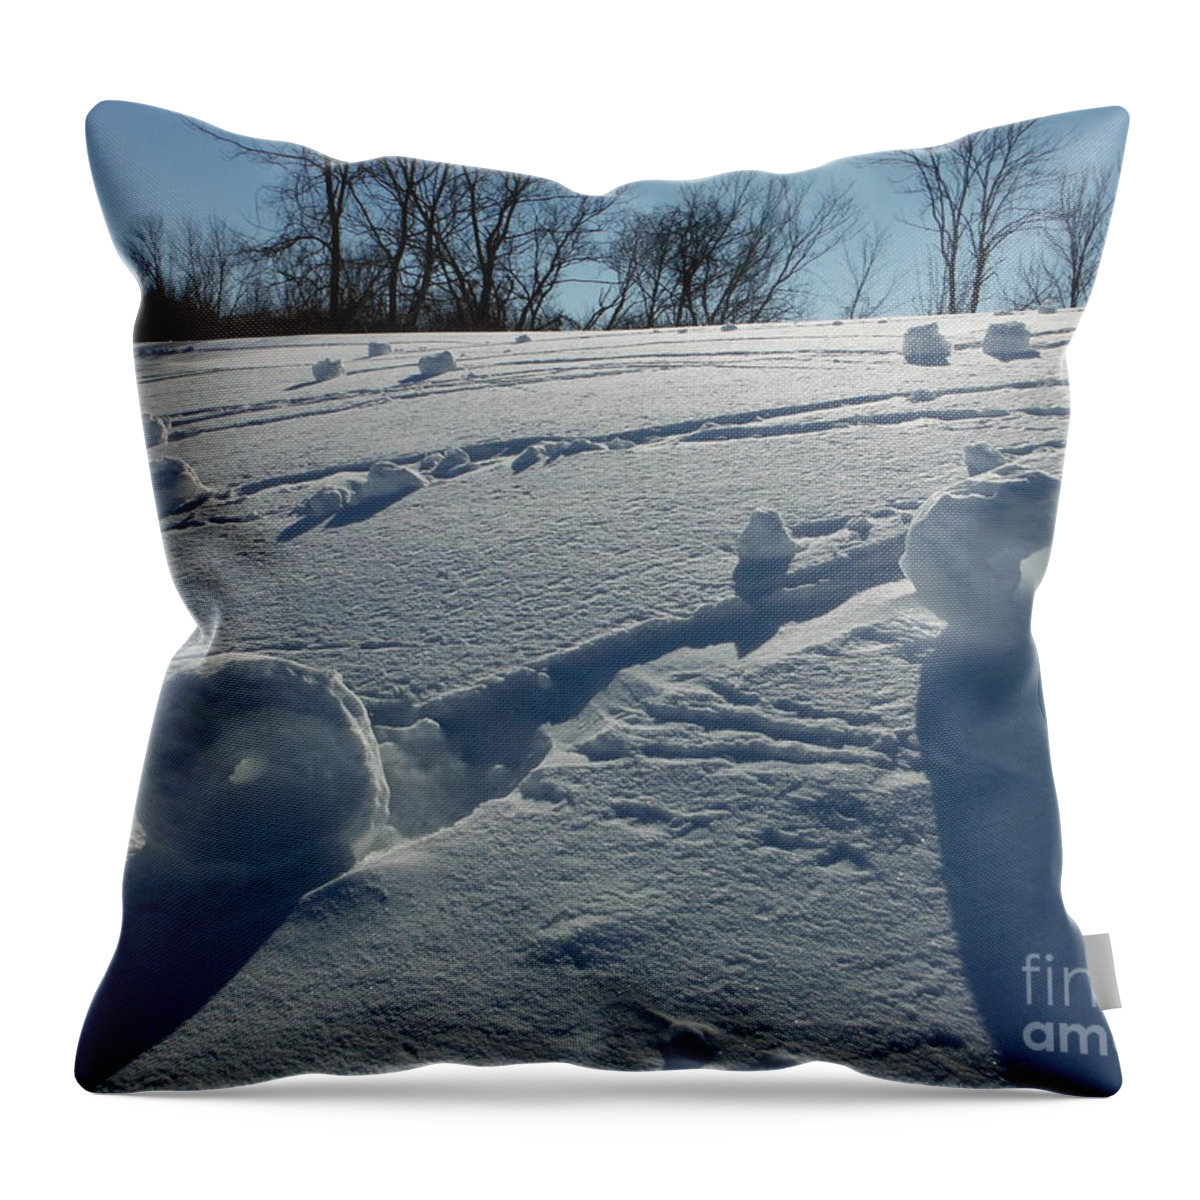 Snow Rollers Throw Pillow featuring the photograph Snow Rollers 22 by Paddy Shaffer